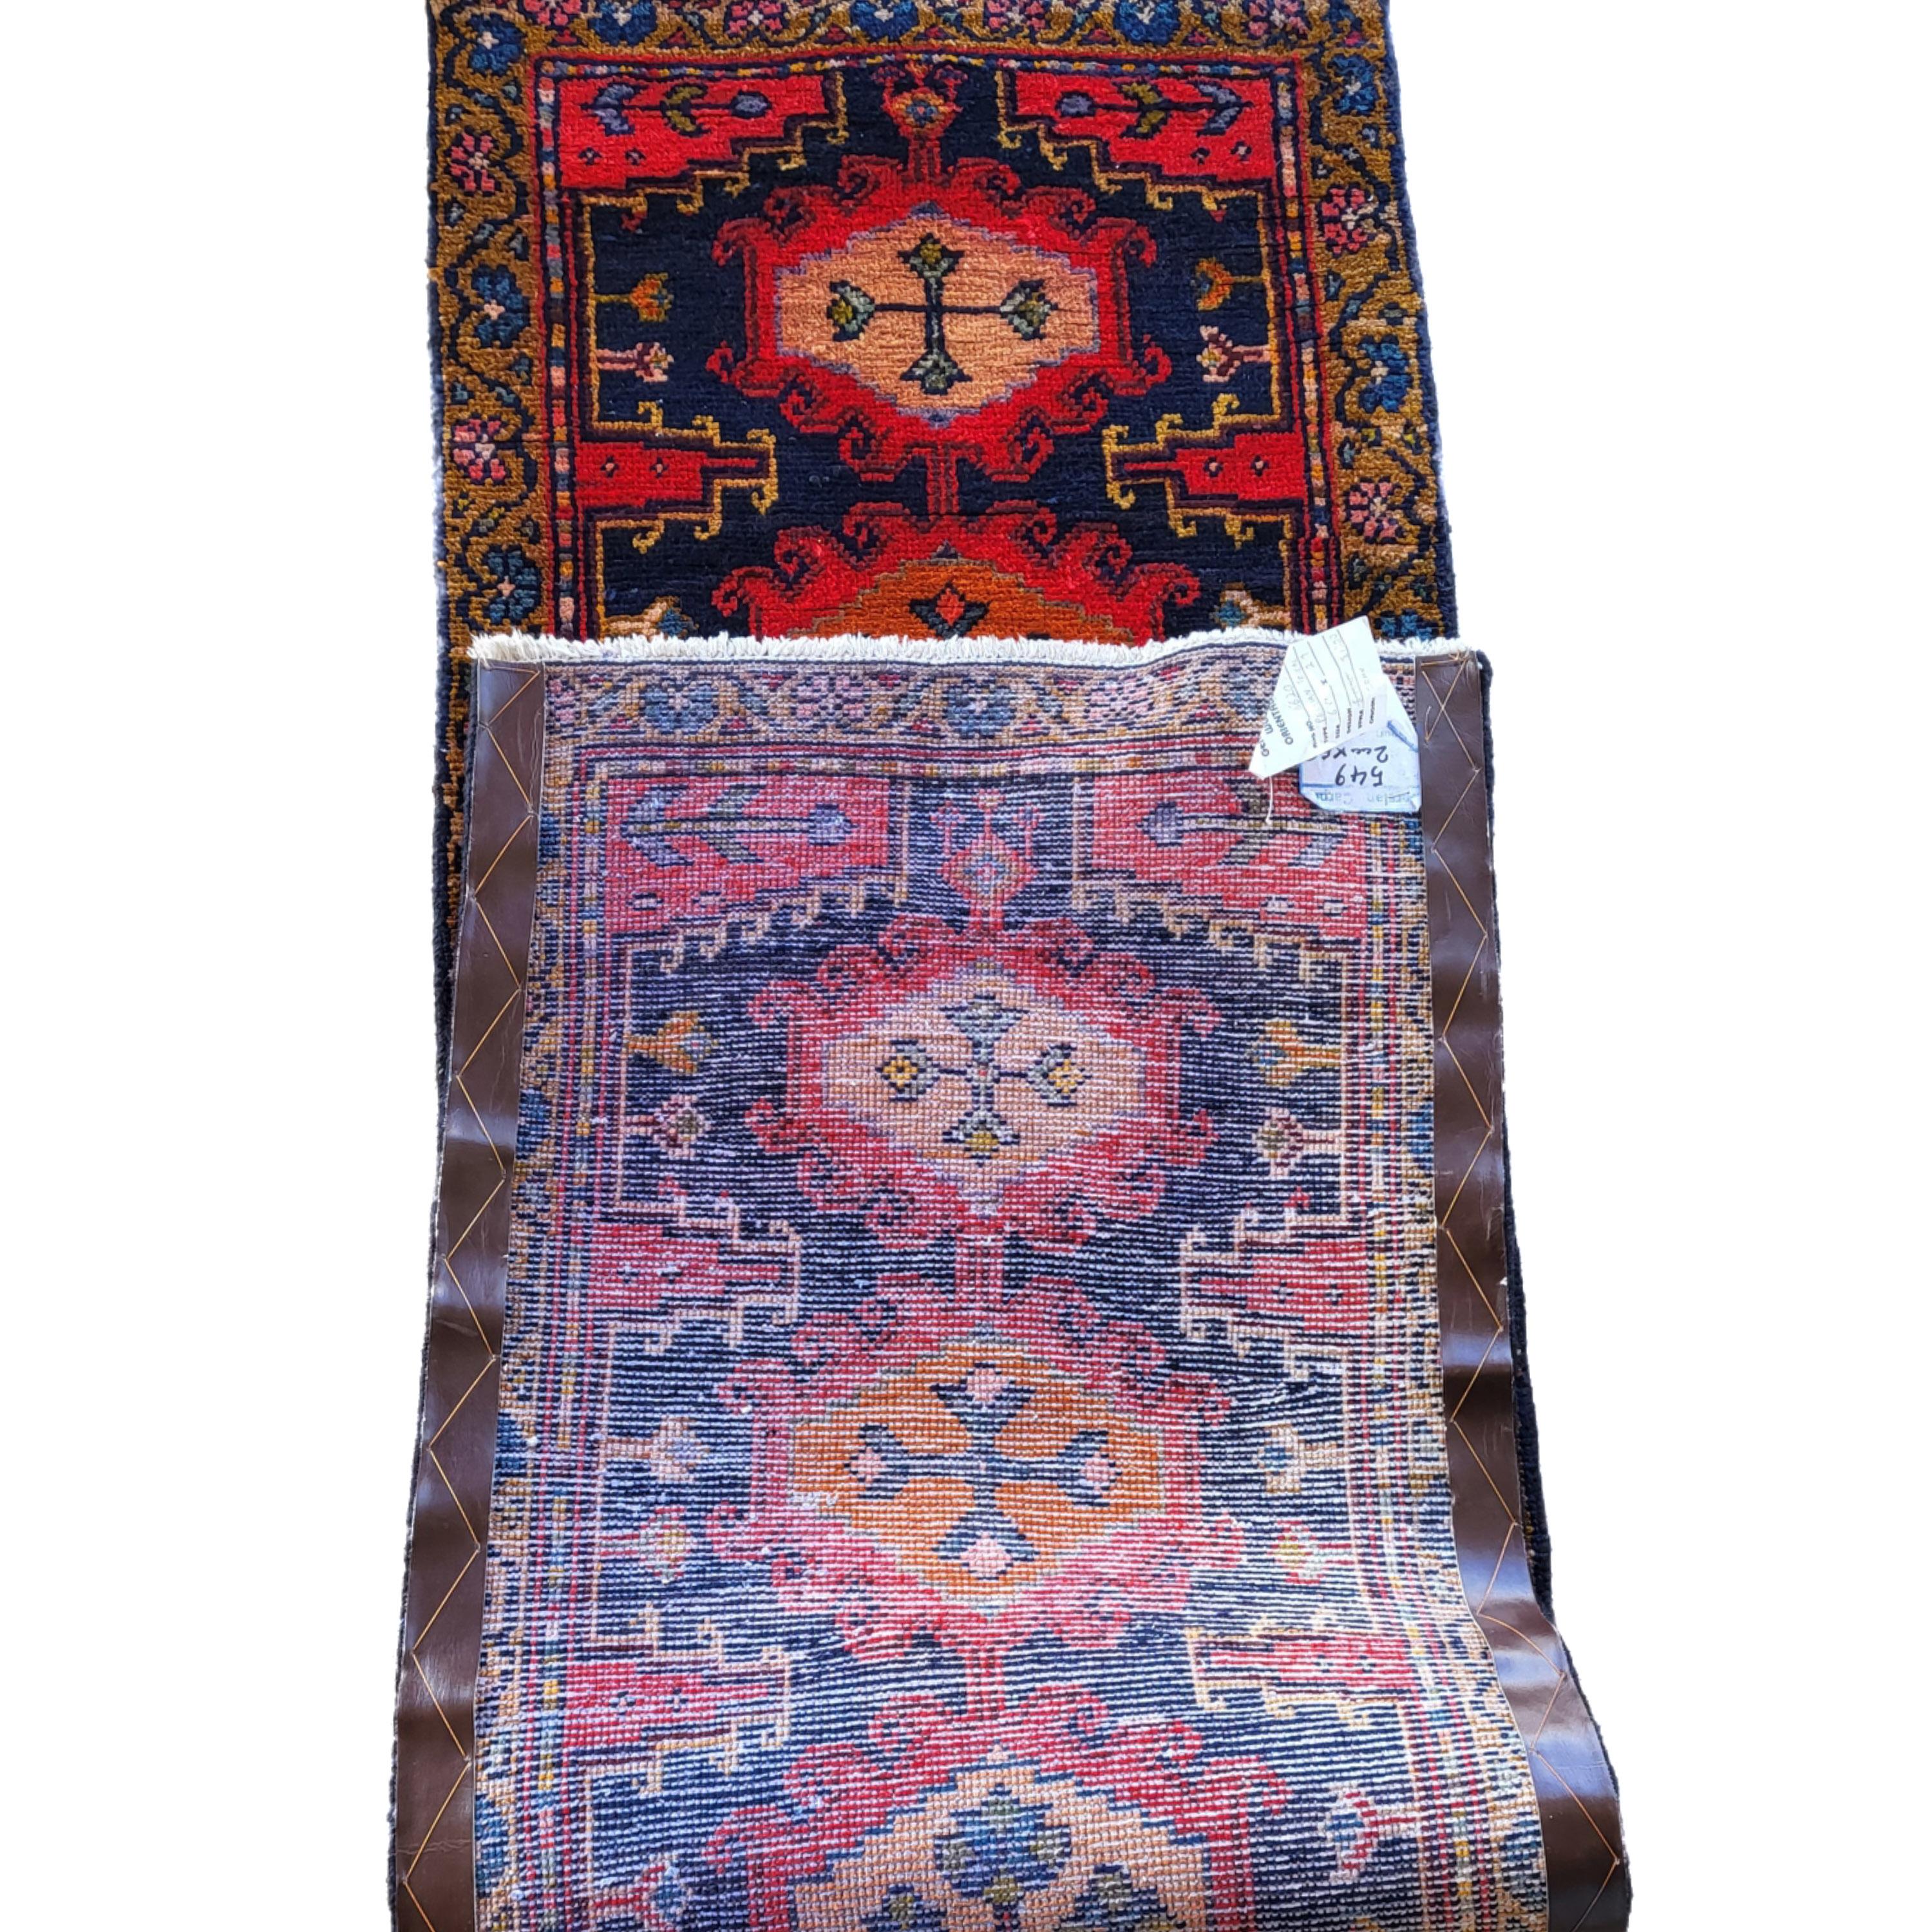 Flawless, 40's Persian Viss Runner

Handwoven in Viss area of Arak, Iran.

Featuring soft and plush Persian wool masterfully hand woven, by tribal persian natives.

This piece boasts a striking color selection. The bold design brings attention to